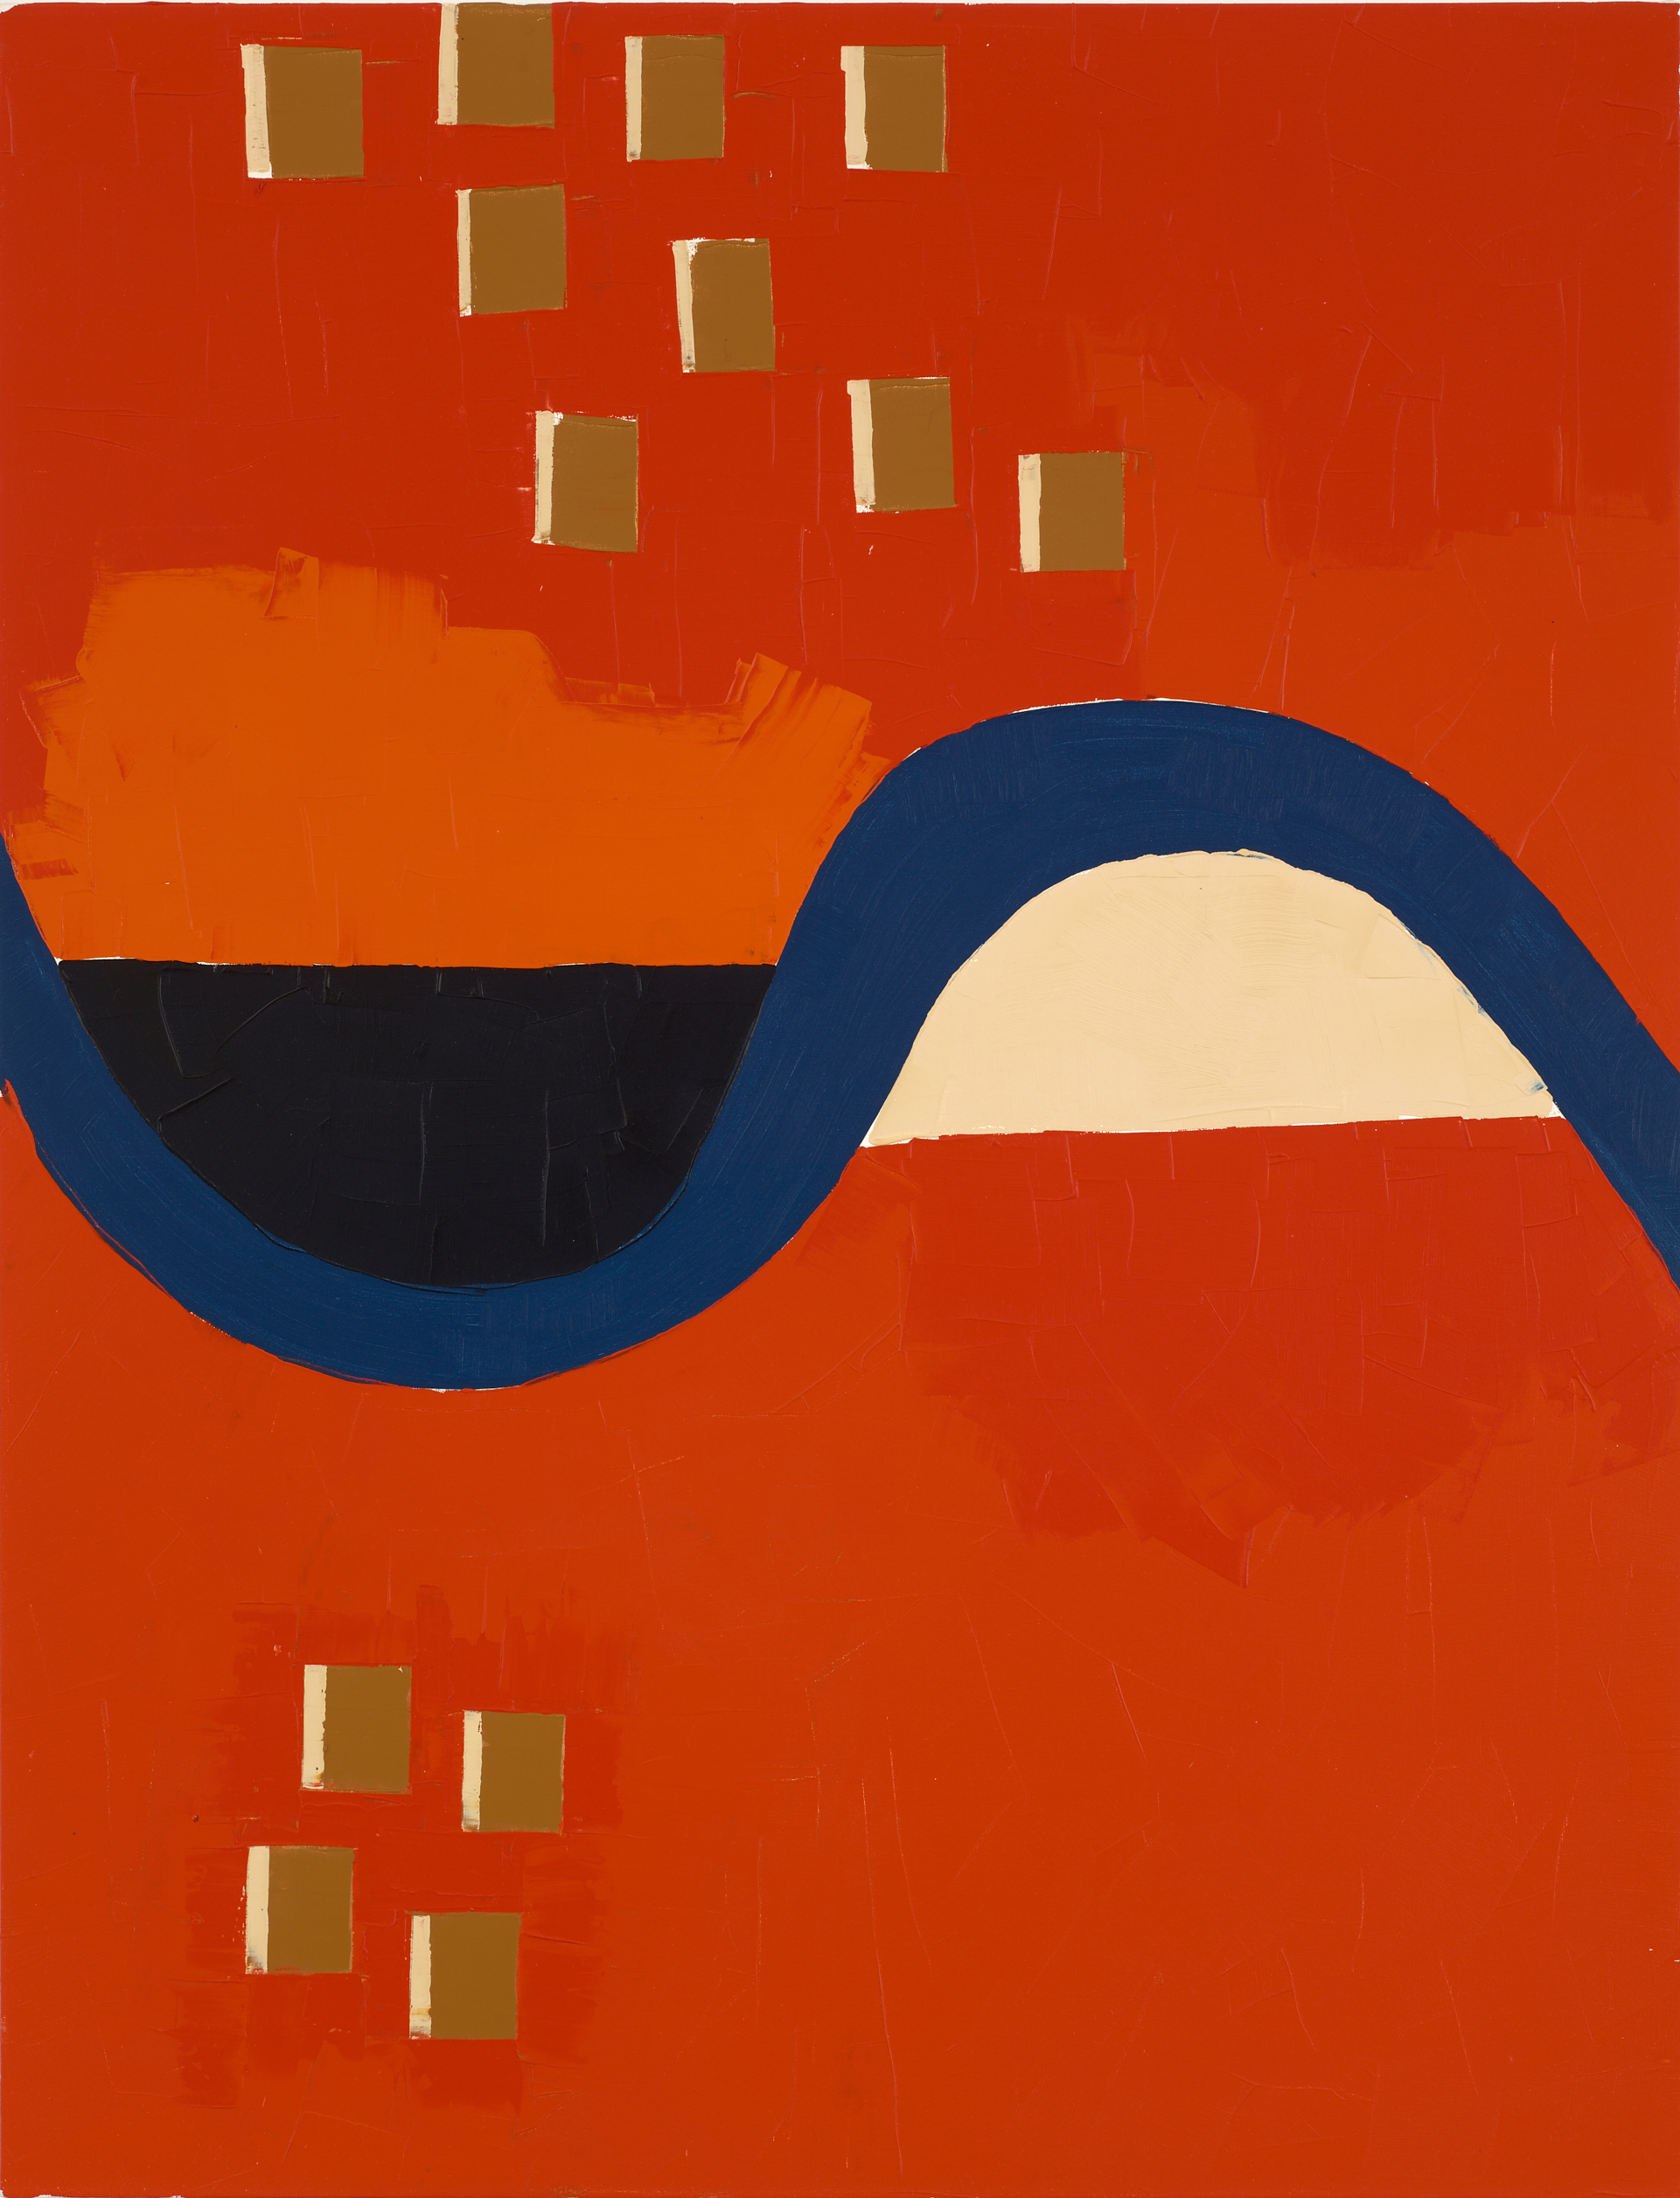 The Wake, 1989-90, oil on canvas, 52 x 40 inches